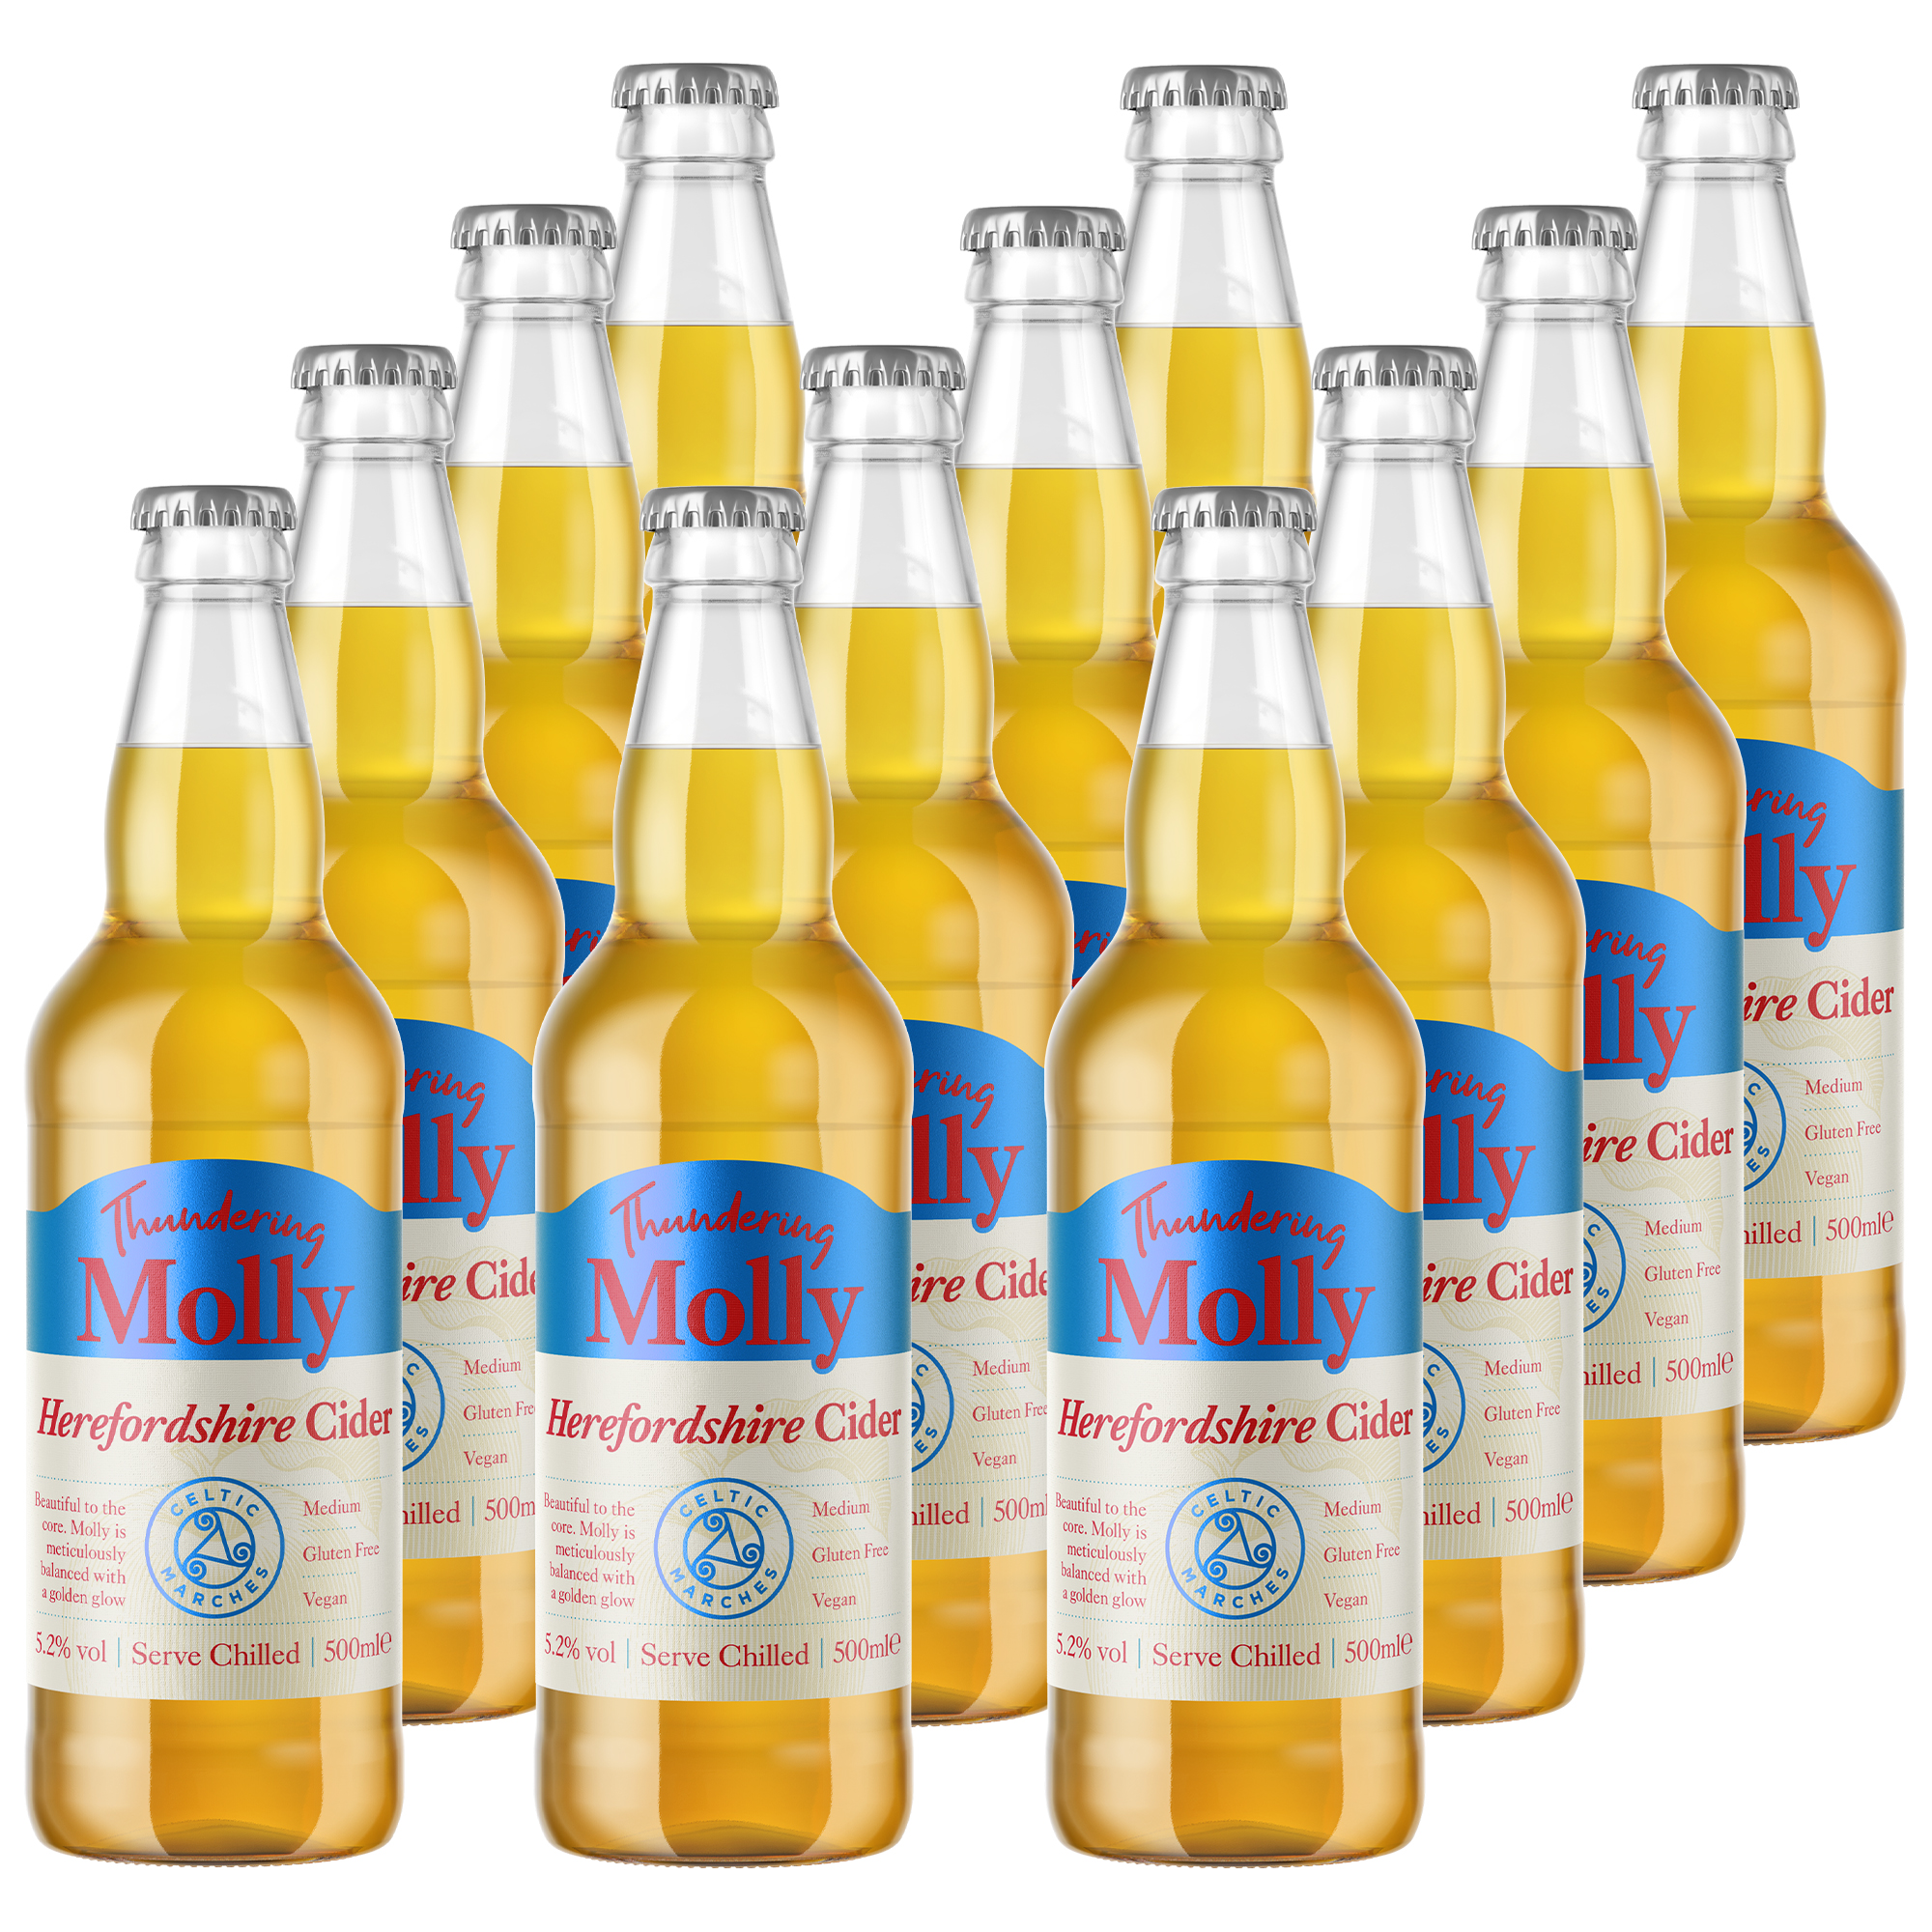 Celtic Marches Thundering Molly Cider 12x500ml